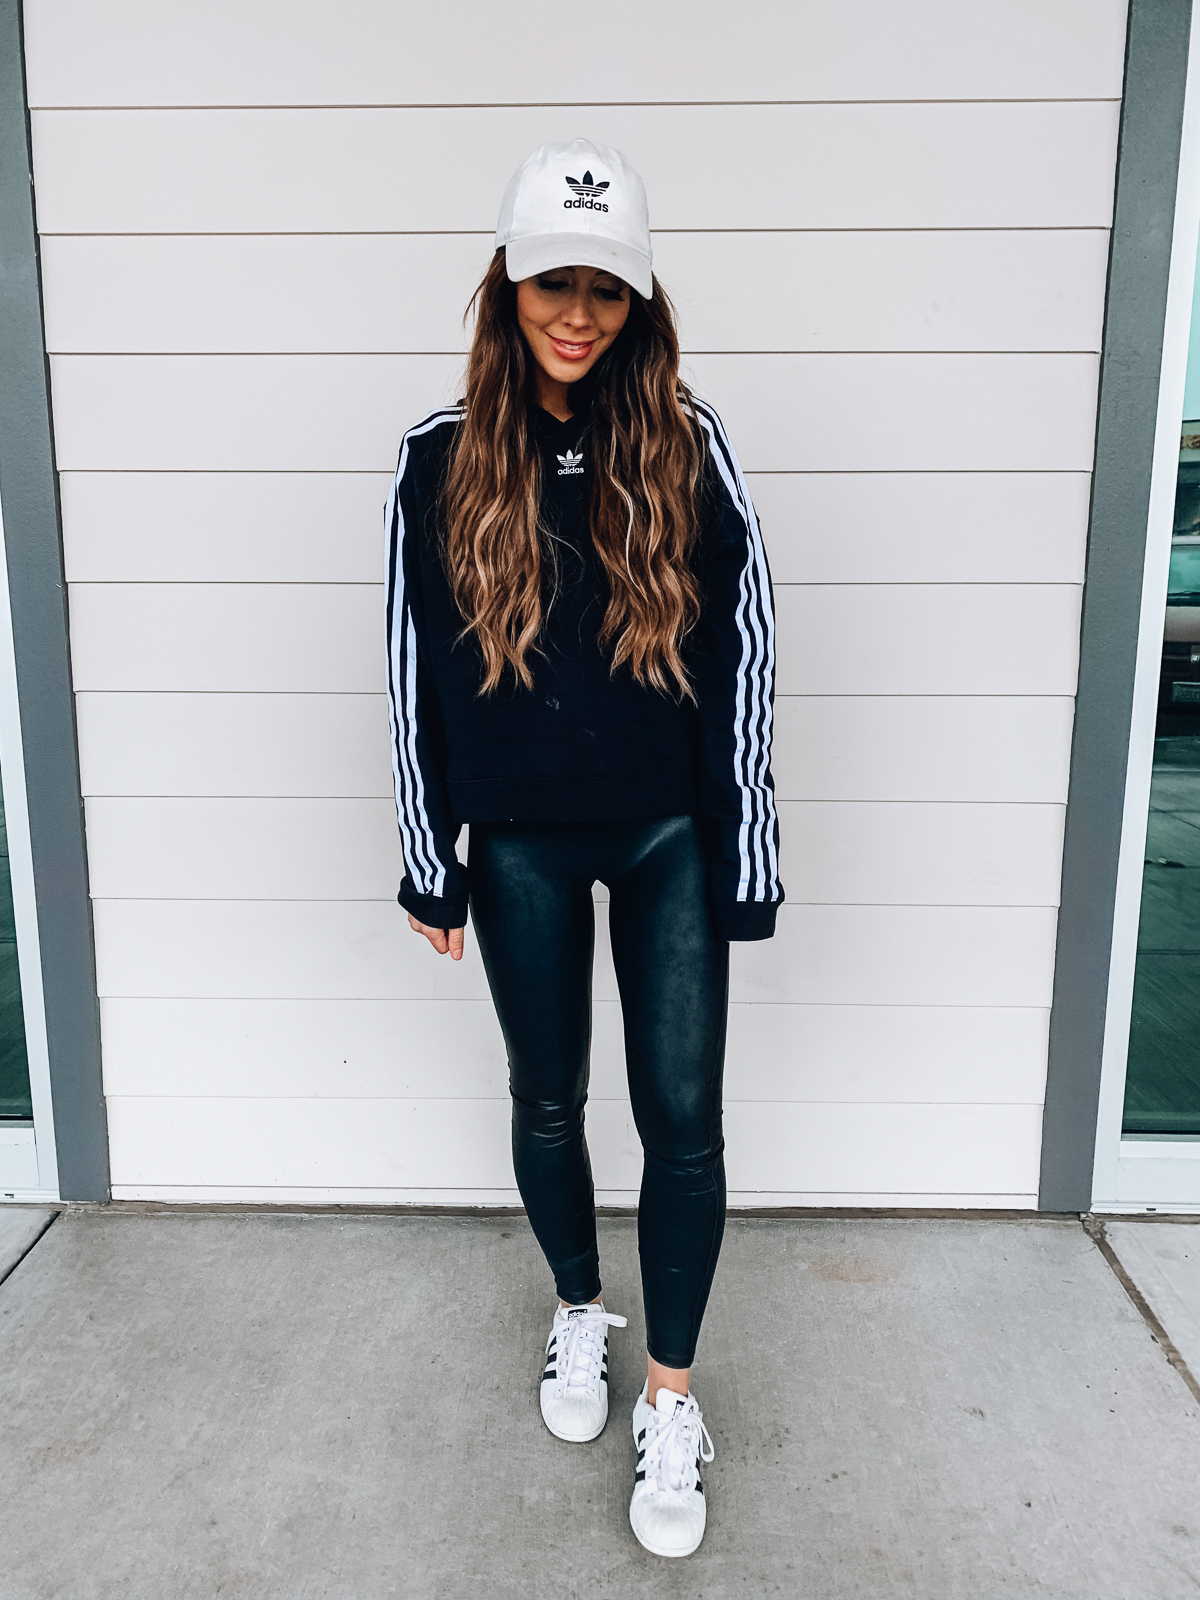 adidas hat outfit